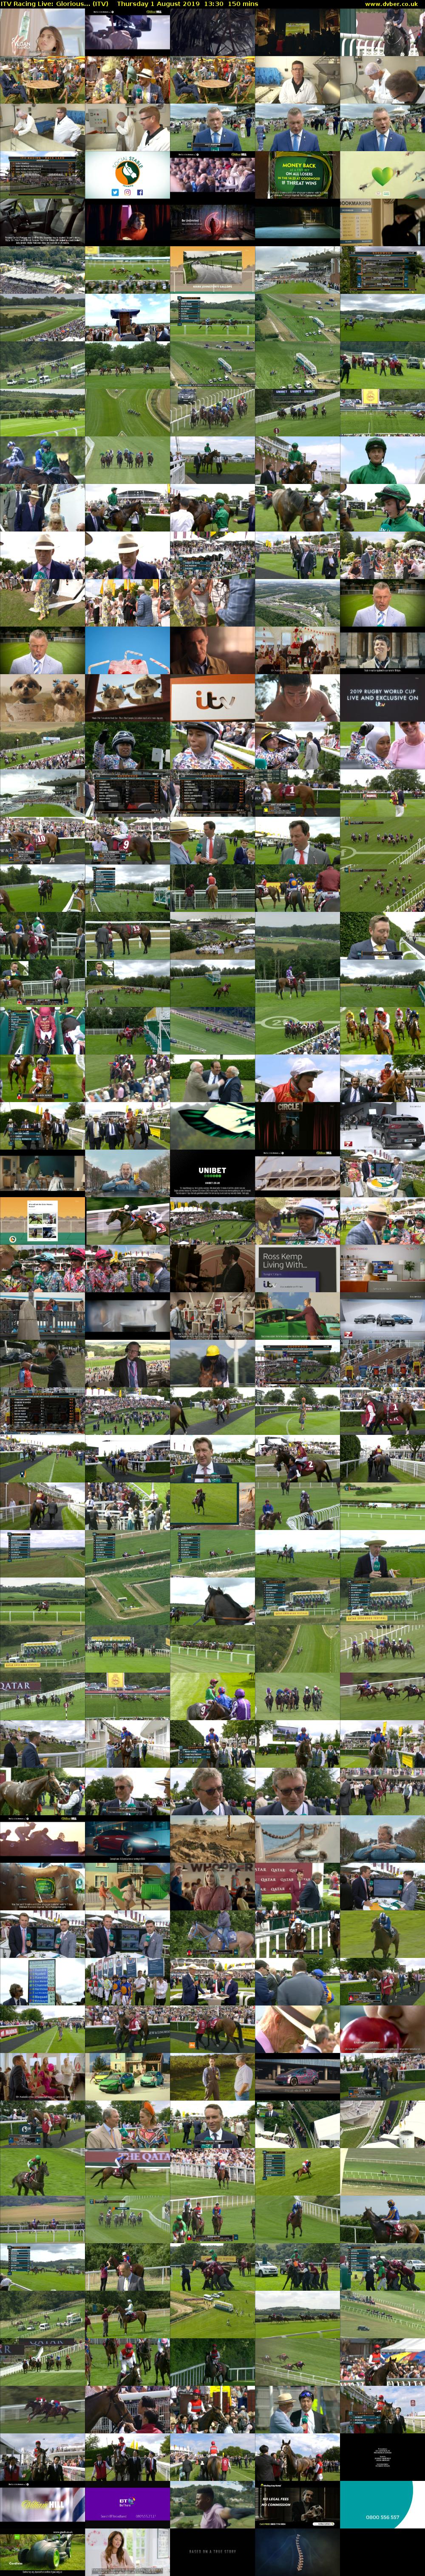 ITV Racing Live: Glorious... (ITV) Thursday 1 August 2019 13:30 - 16:00